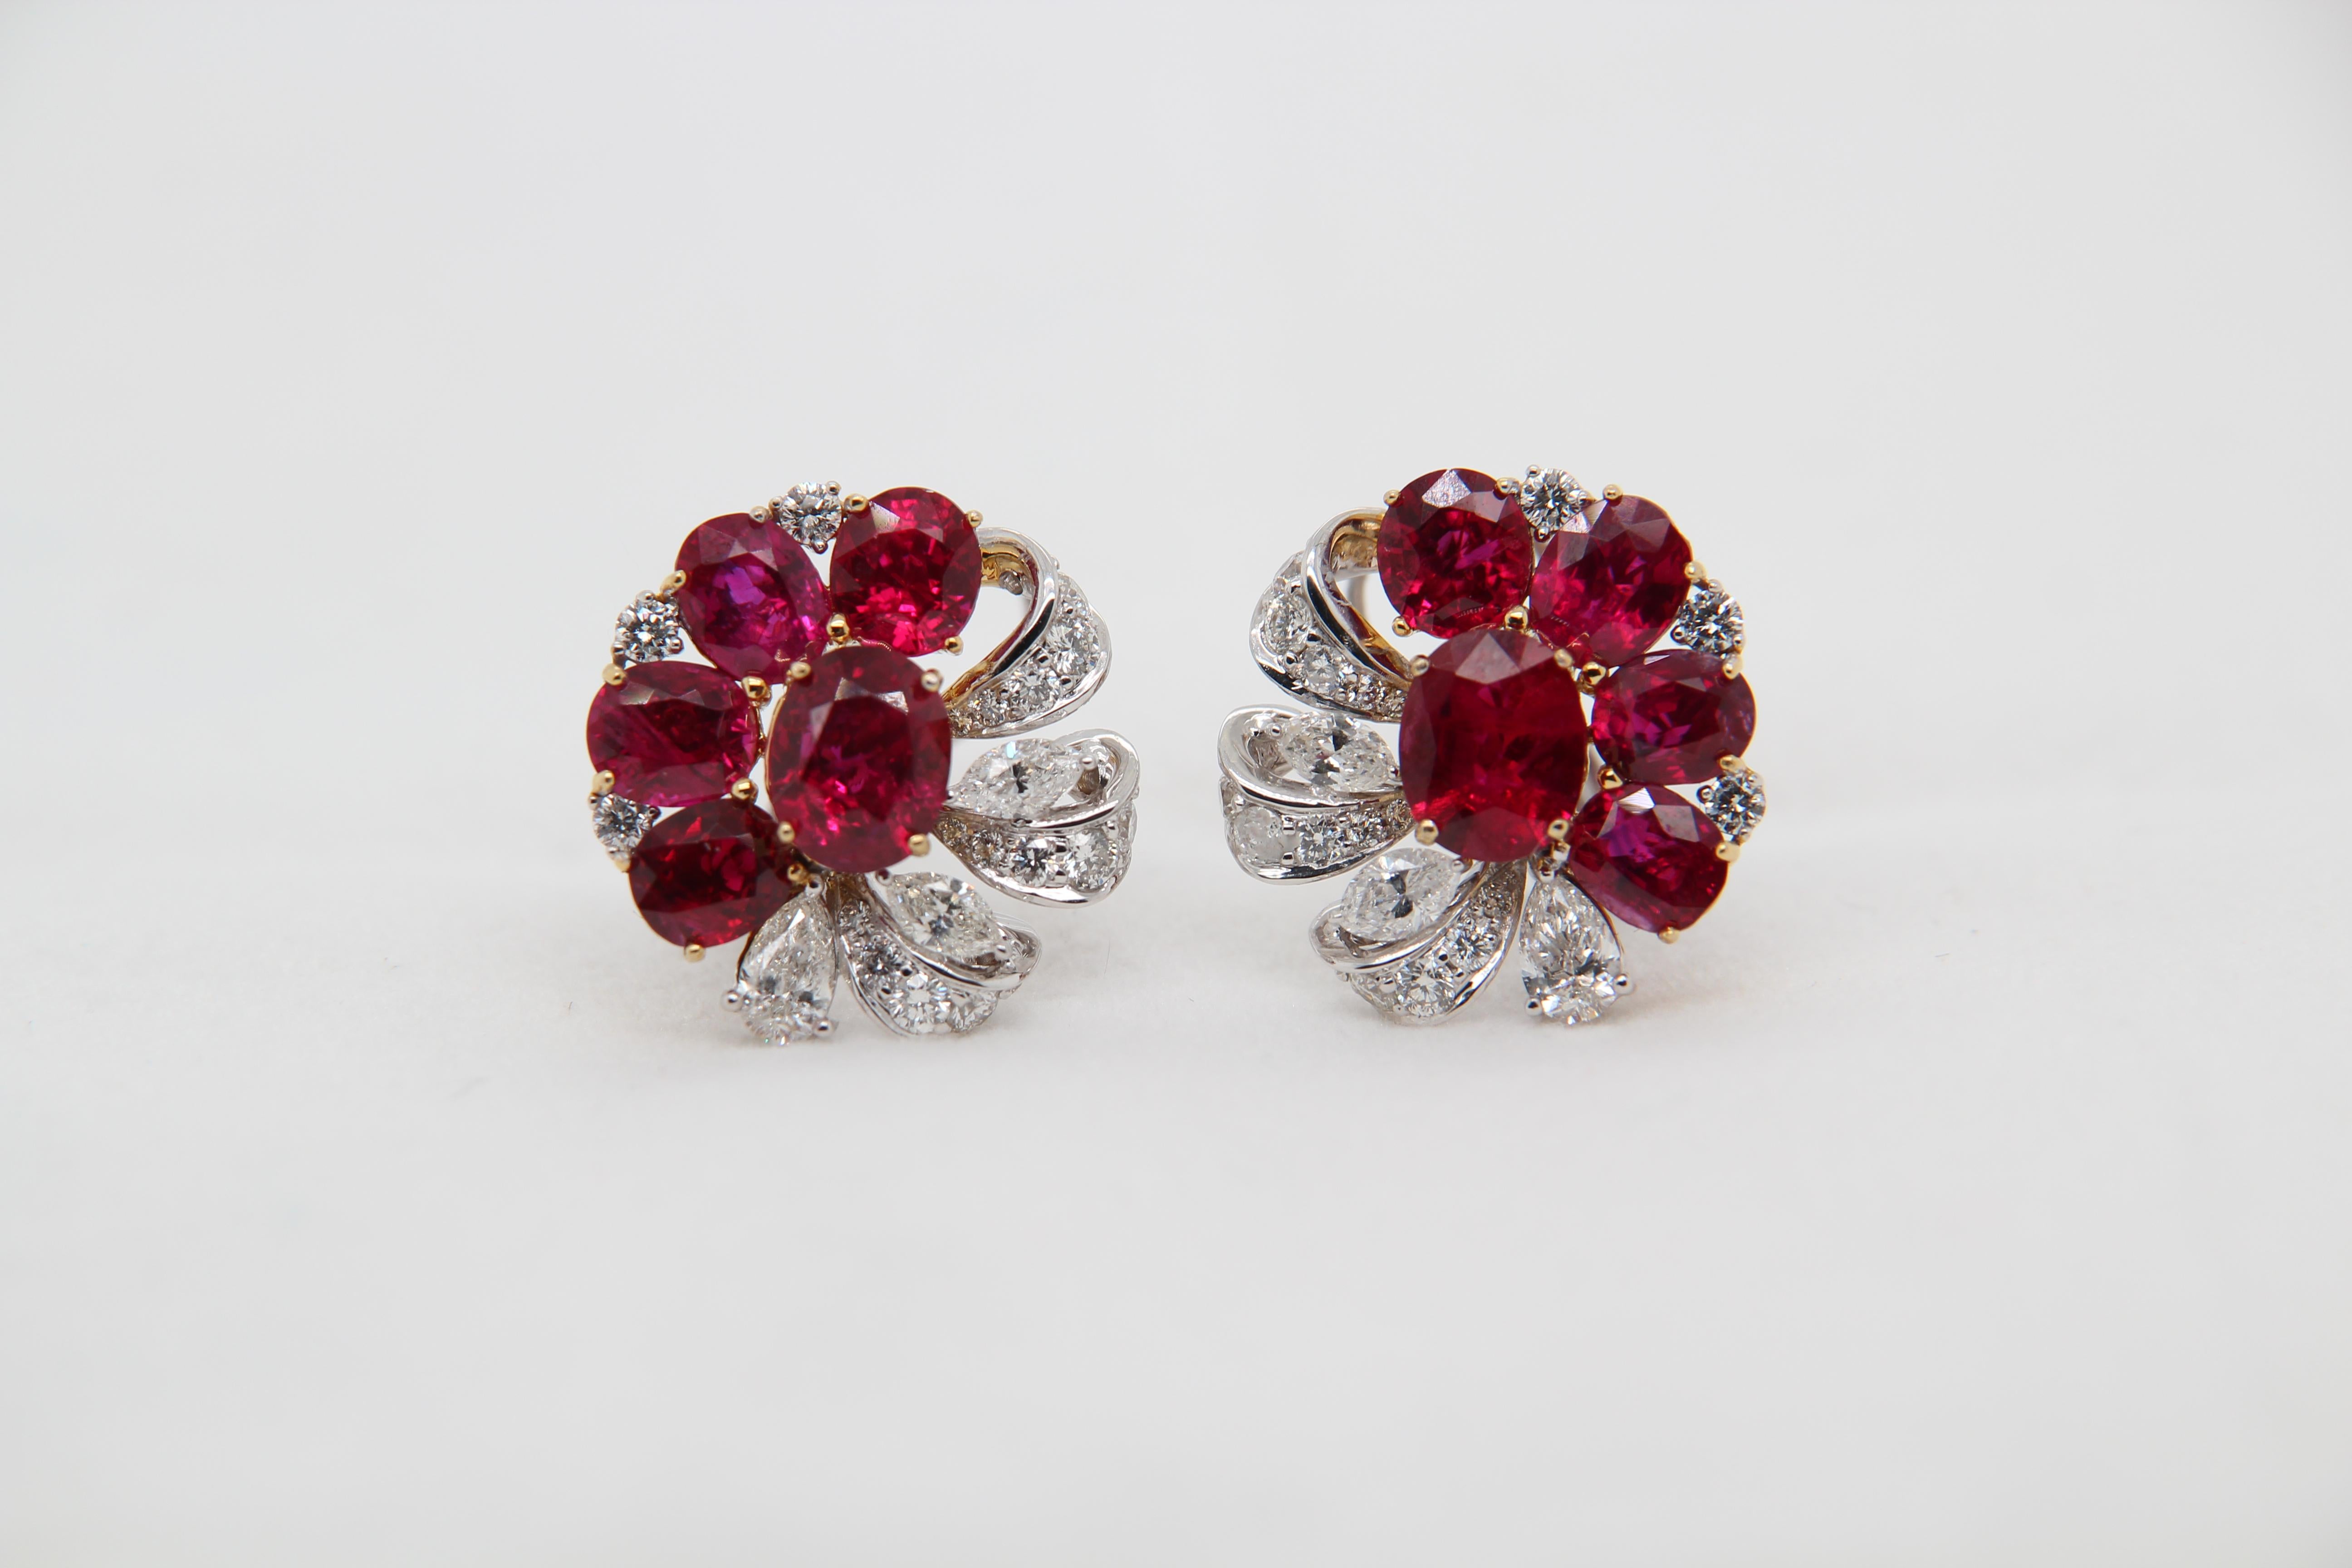 Earrings made from Burmese unheated rubies and diamond earrings. The centre two rubies are of weight 1.02 and 1.62 carat and are both certified by Gem Research Swisslab (GRS) unheated and 'Pigeon's Blood'. The two centre stones as well as the